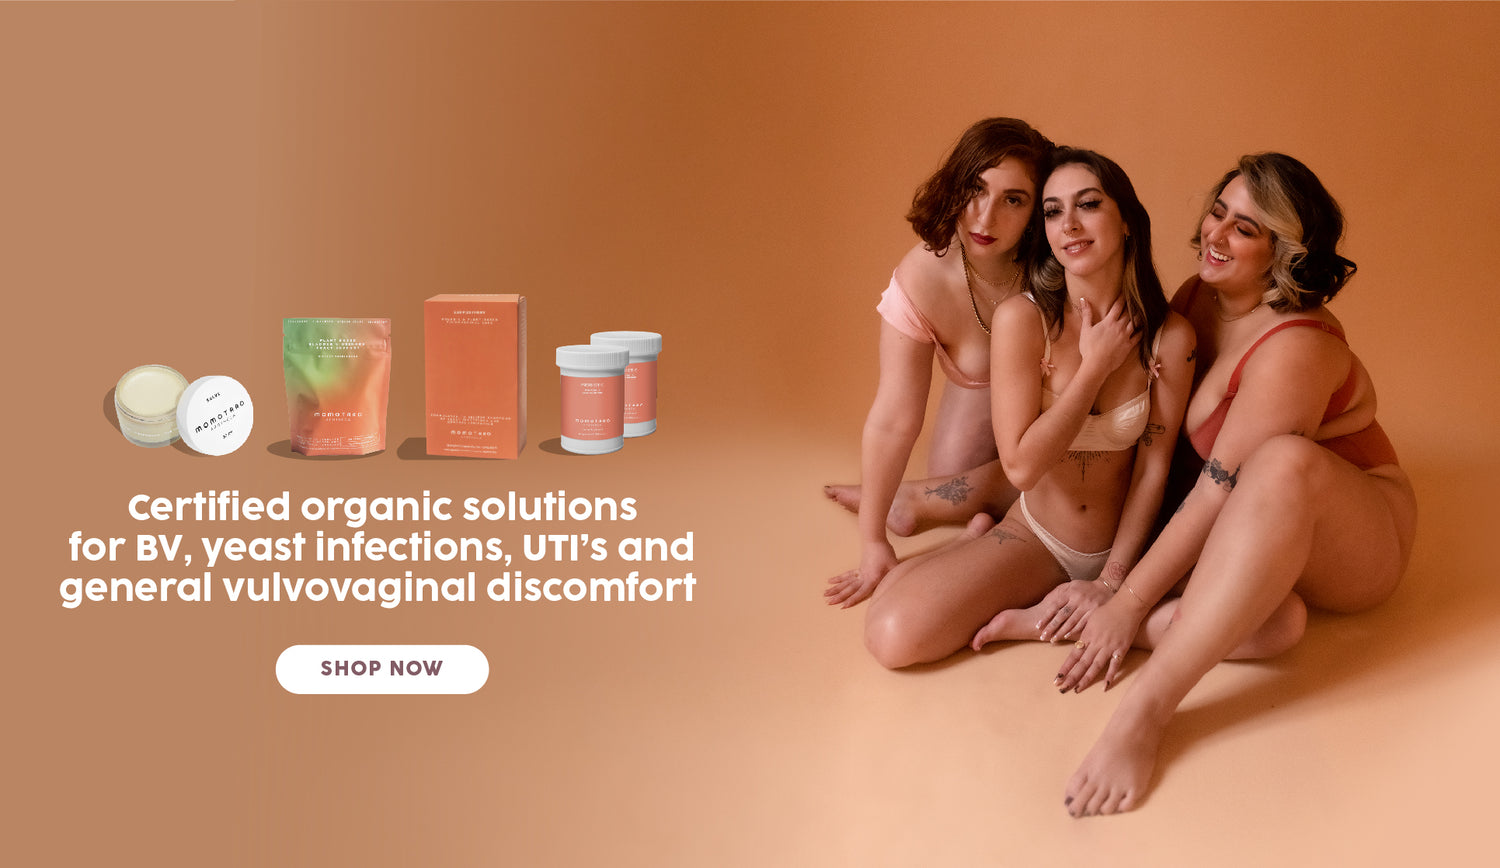 Certified organic solutions for BV, yeast infections, UTI's and general vulvovaginal discomfort. - 3 women smiling